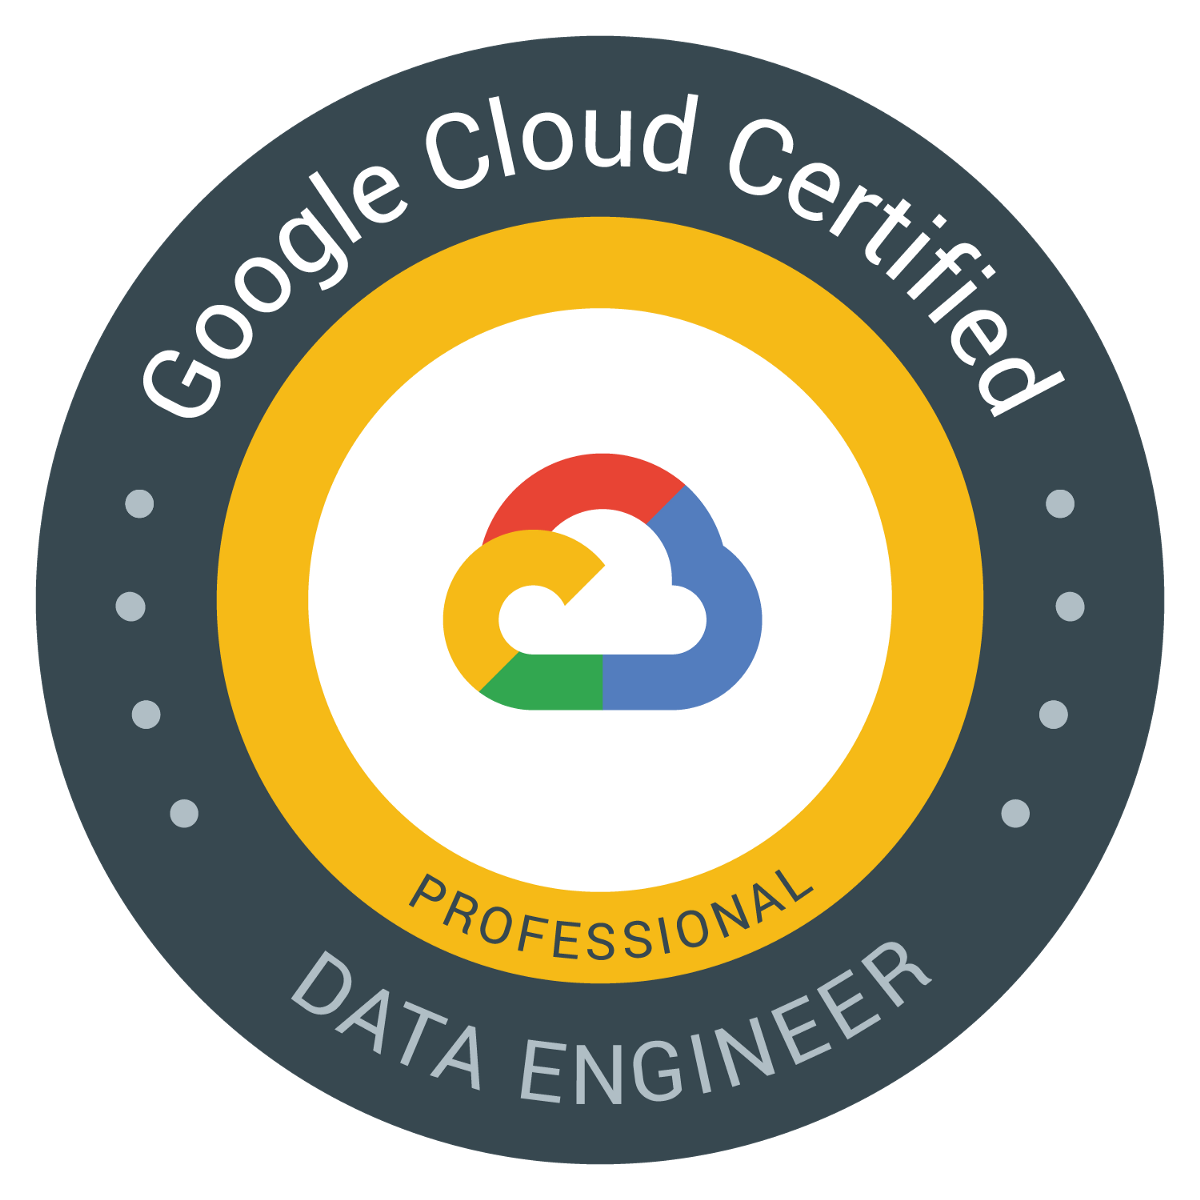 gcp-data-engineering.png